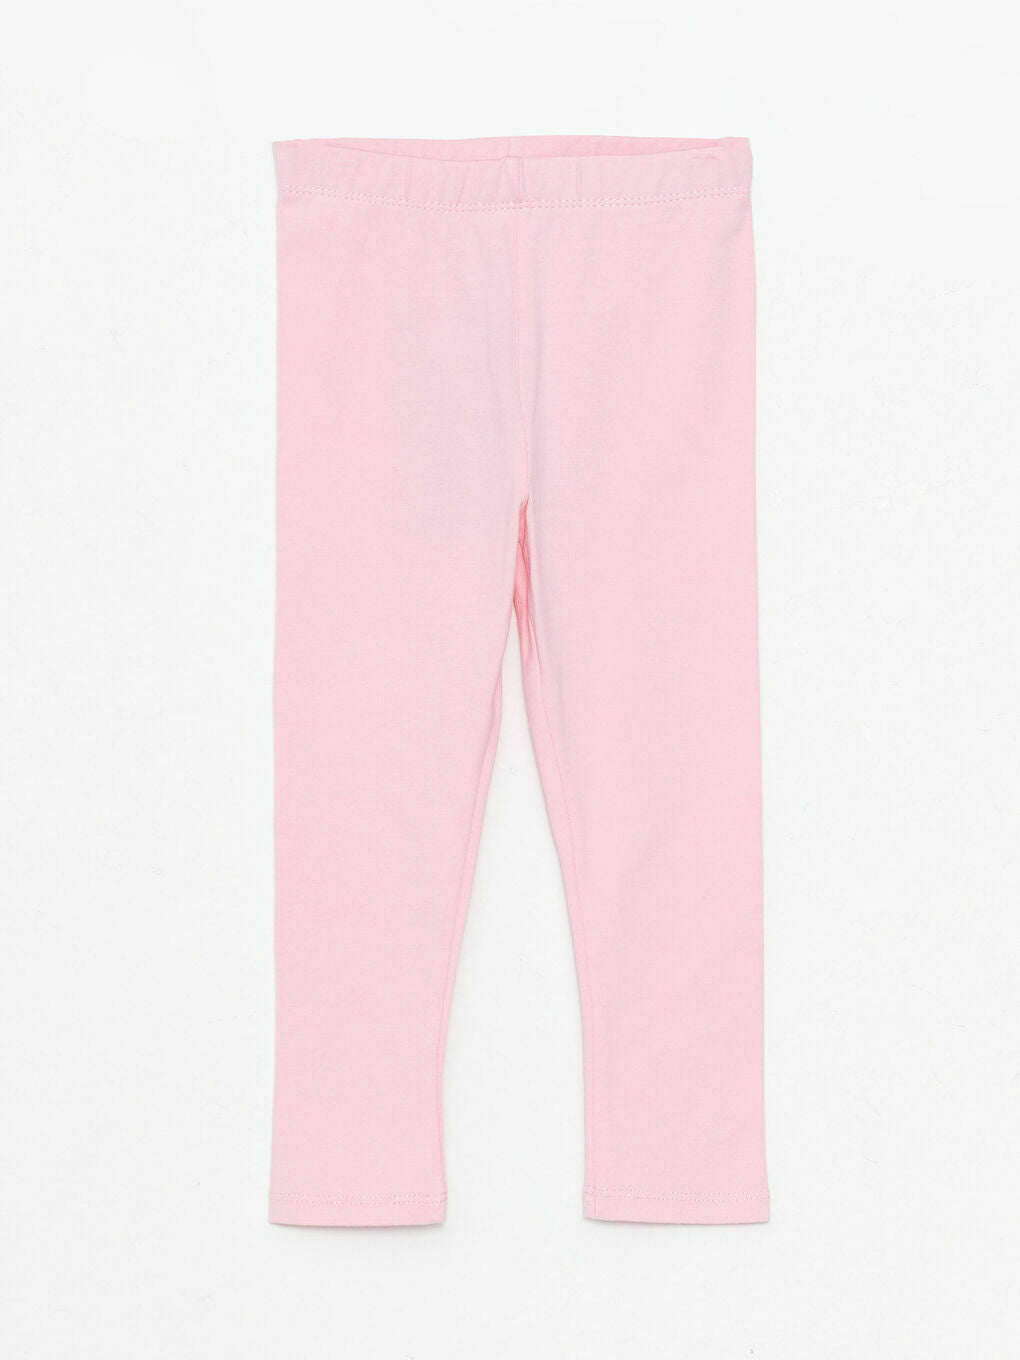 Pink Basic Tights for Baby Girl-Best for Summer Wear